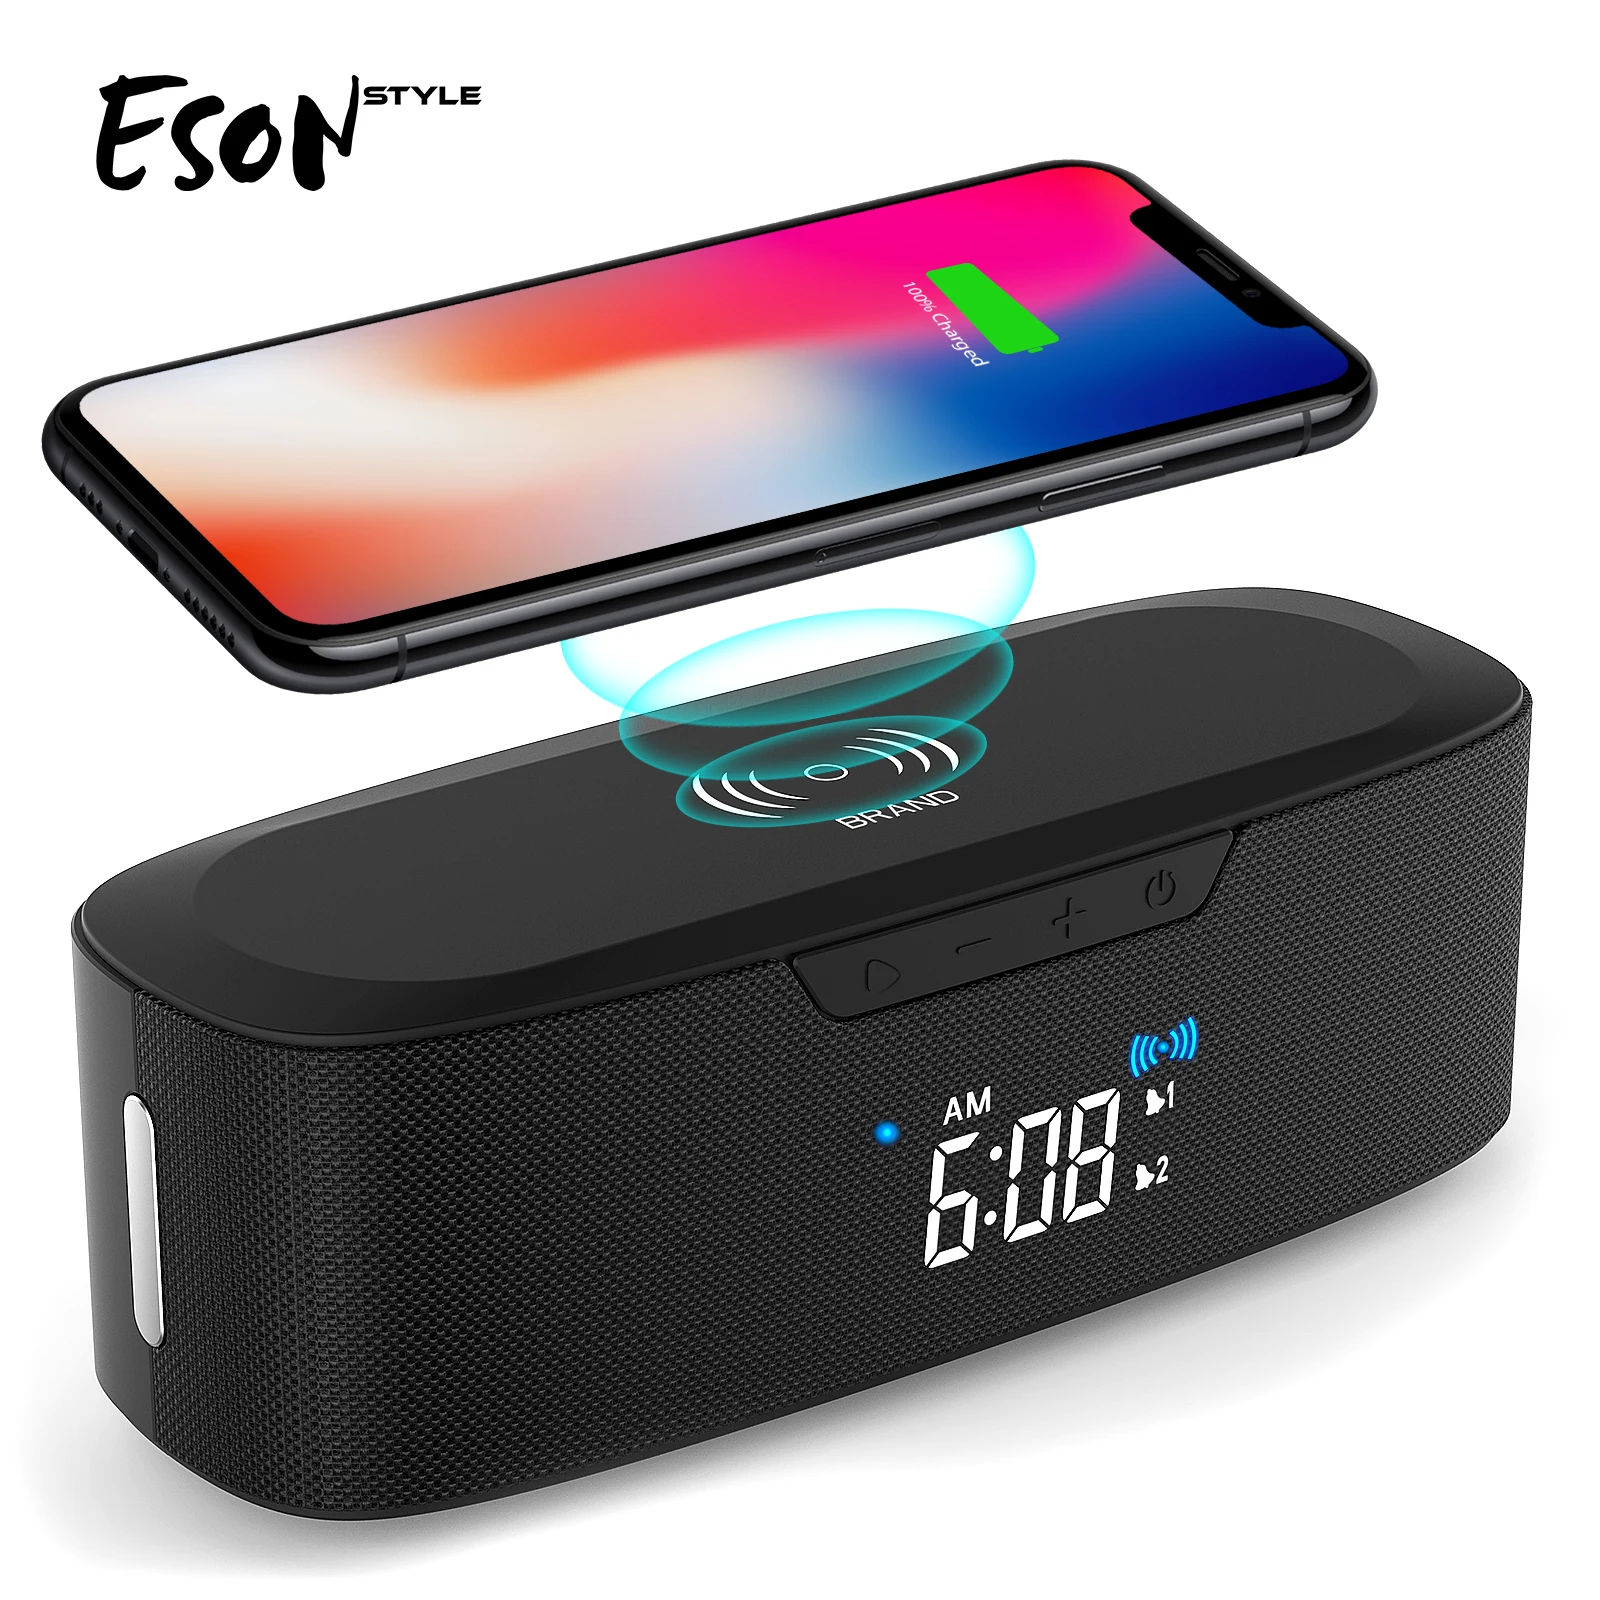 

Eson Style Home Theatre System Dual Alarm Clocks Subwoofer Radio Fm 20W 3.7V Tws Wireless Charger Bluetooth Speakers